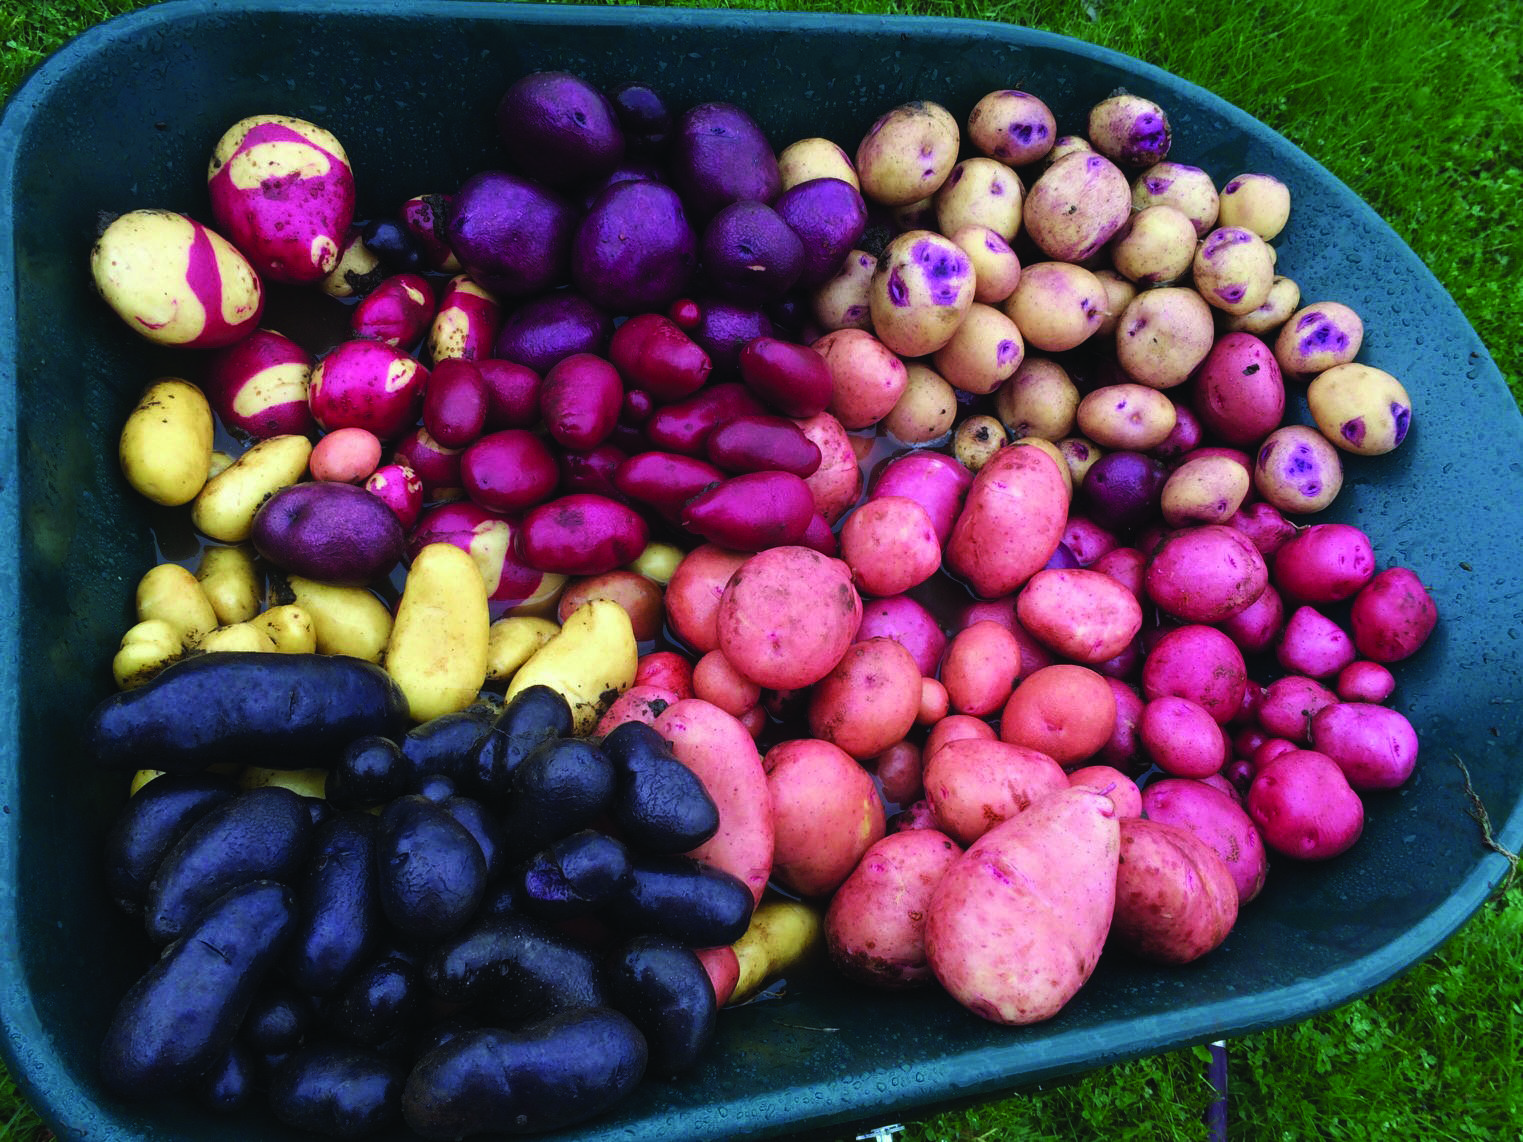 Jane Wiebe’s wheelbarrow of lovely tubers will cause any potato aficionado’s heart to sing. Alaska potatoes are perfect for these spicy potato recipes. The photo was taken on Oct. 7, 2019, in Homer. (Photo by Rosemary Fitzpatrick)                                Jane Wiebe’s wheelbarrow of lovely tubers will cause any potato aficionado’s heart to sing. The photo was taken on Oct. 7, 2019, in Homer, Alaska. (Photo by Rosemary Fitzpatrick)